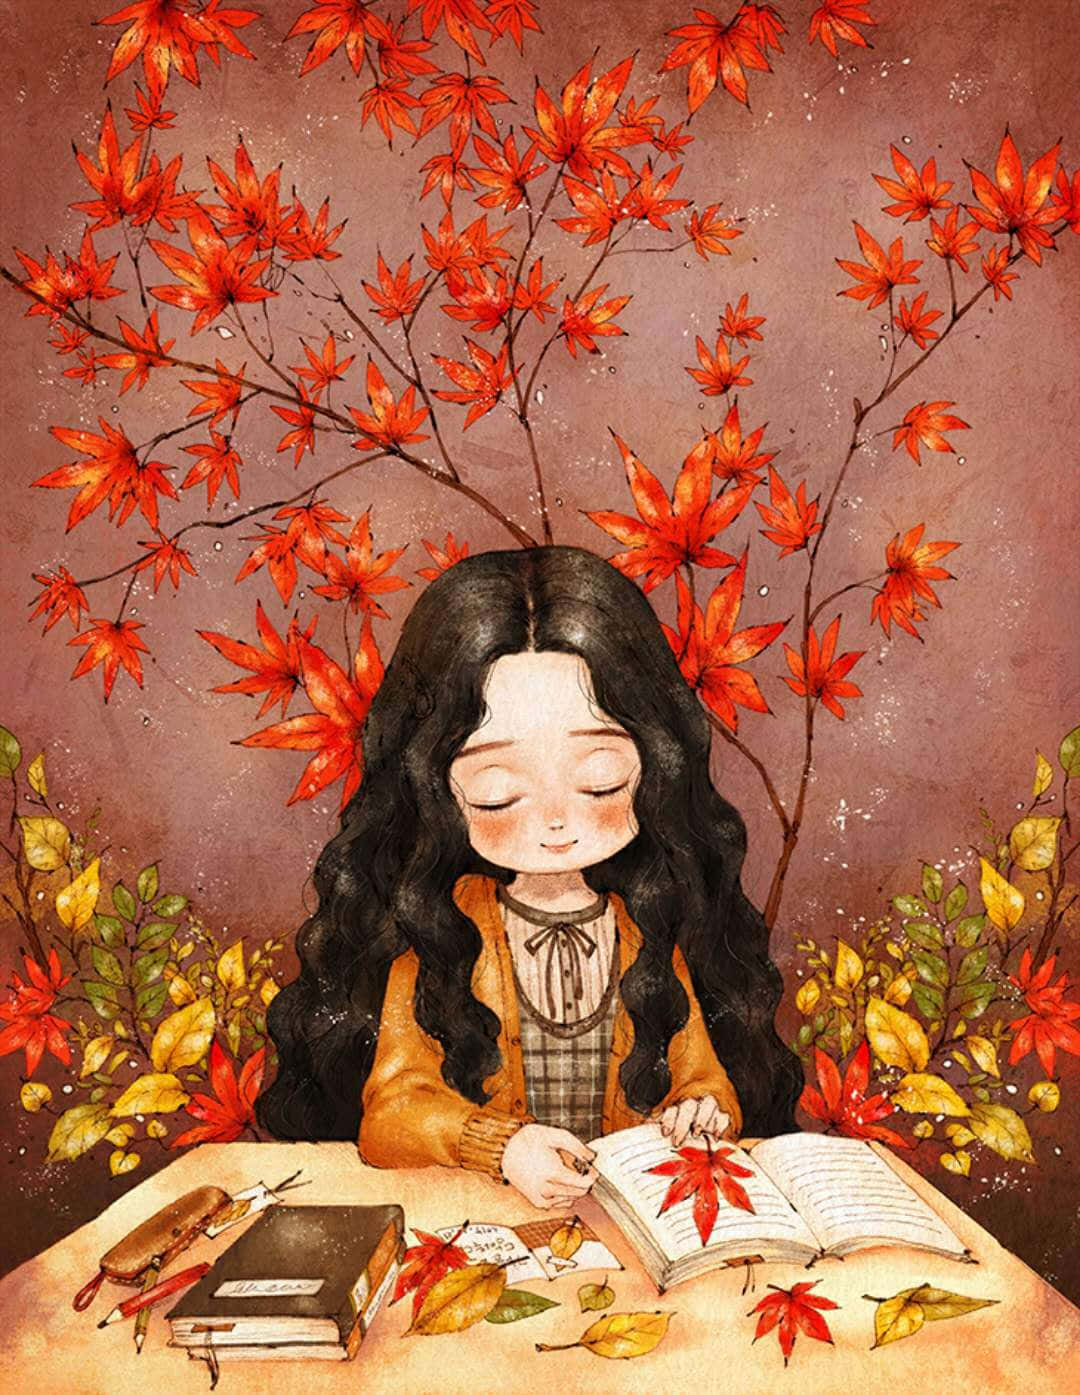 A serene autumn scene with an Anime Girl engrossed in writing amidst falling maple leaves. Wallpaper